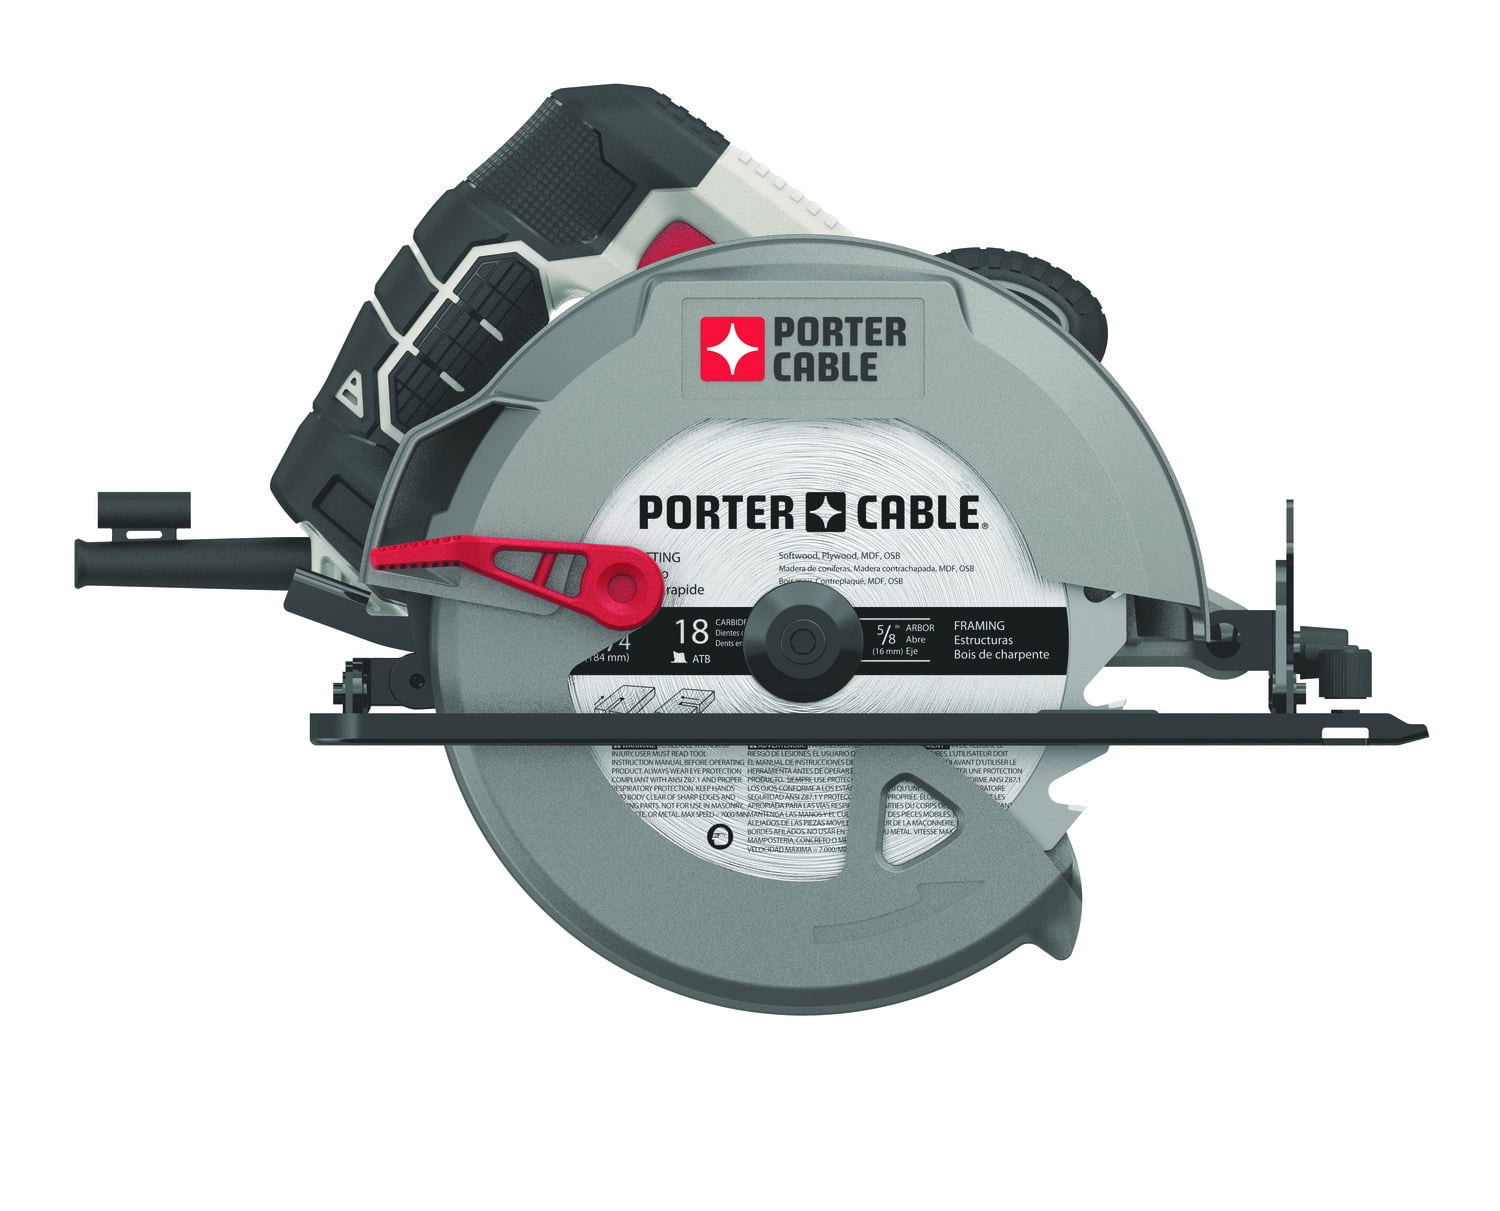 Hyper Tough 12 Amp Corded 7-1/4 inch Circular Saw with Steel Plate Shoe,  Adjustable Bevel, Blade & Rip Fence 